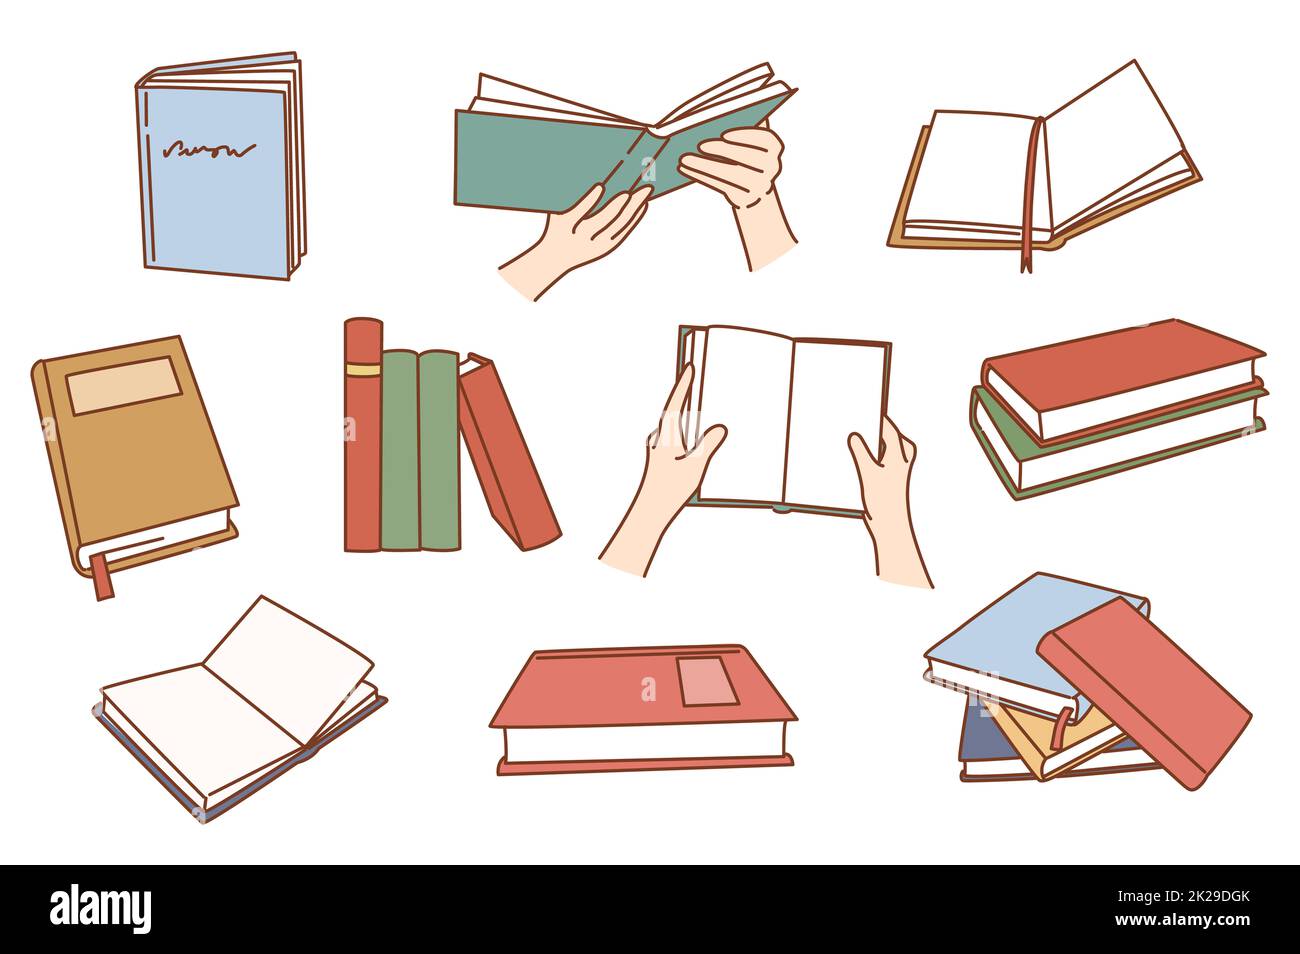 Set of books for studying or self-education Stock Photo